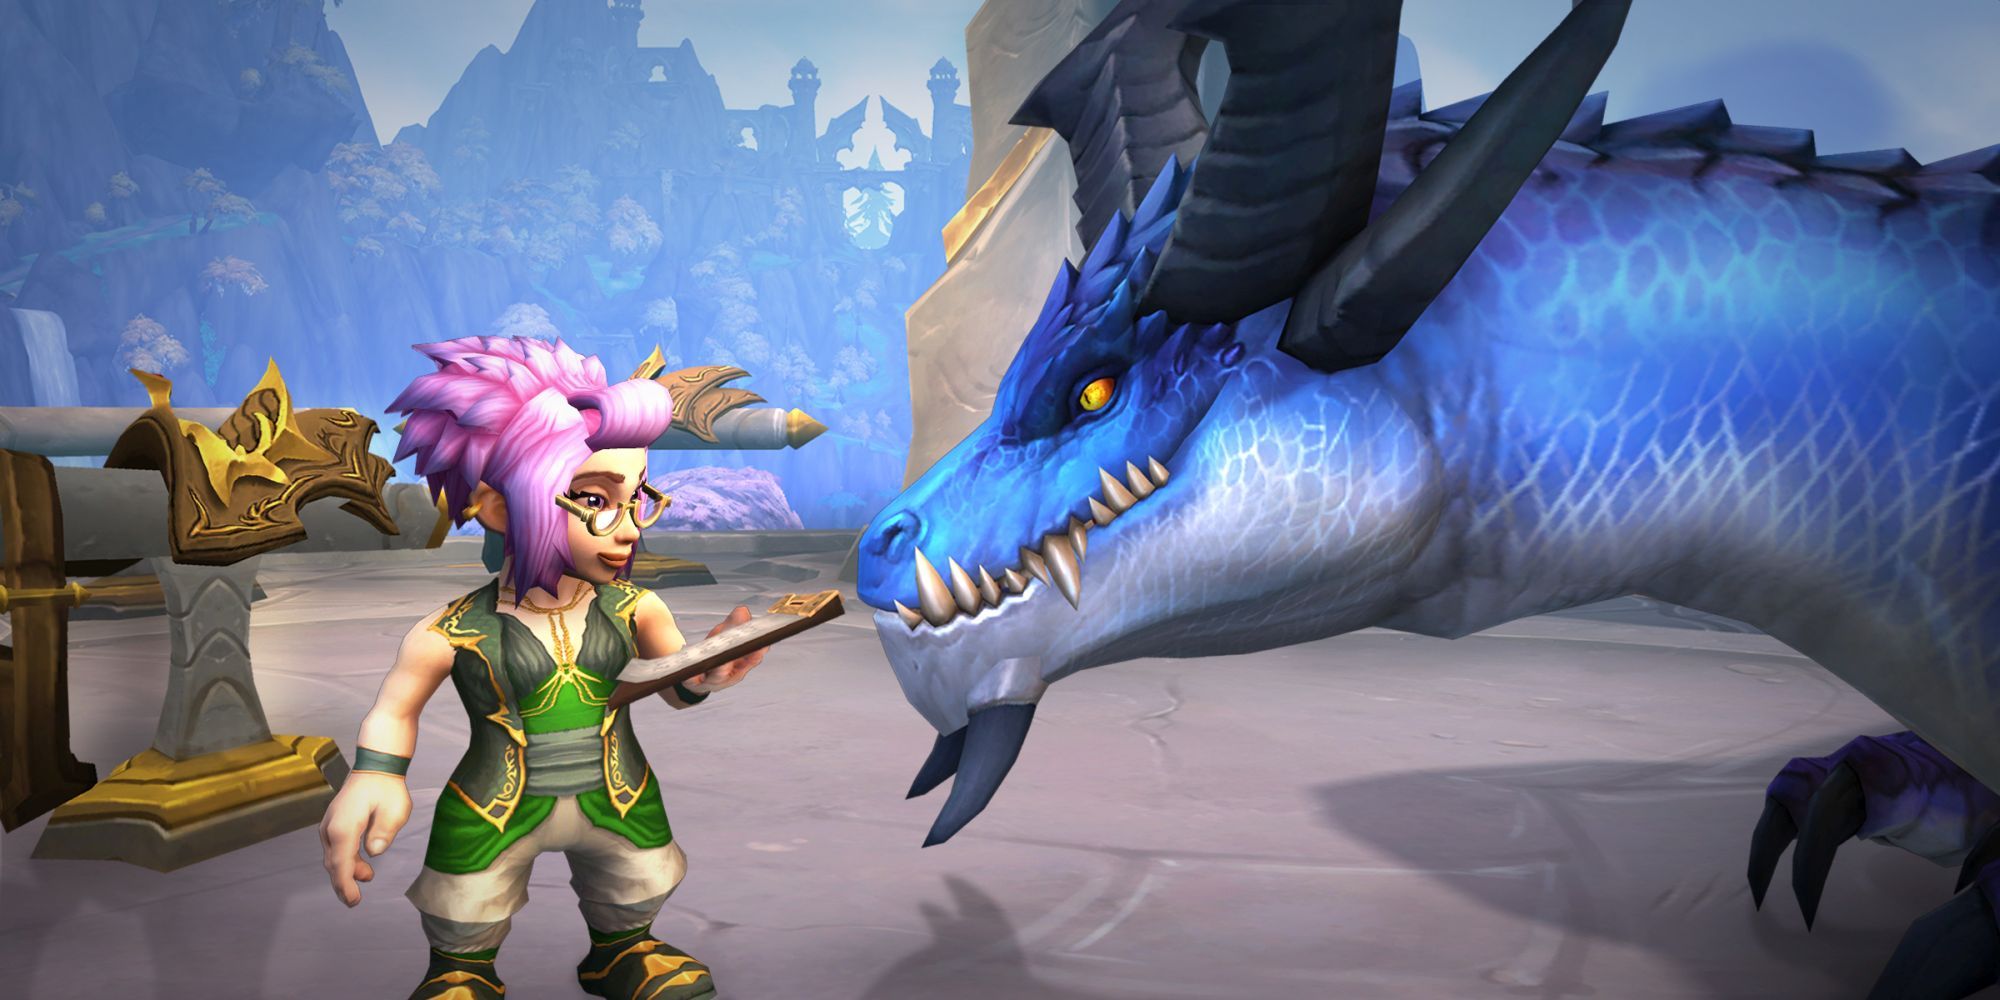 A gnome wearing spectacles speaks to a member of the Blue Dragonflight in World of Warcraft